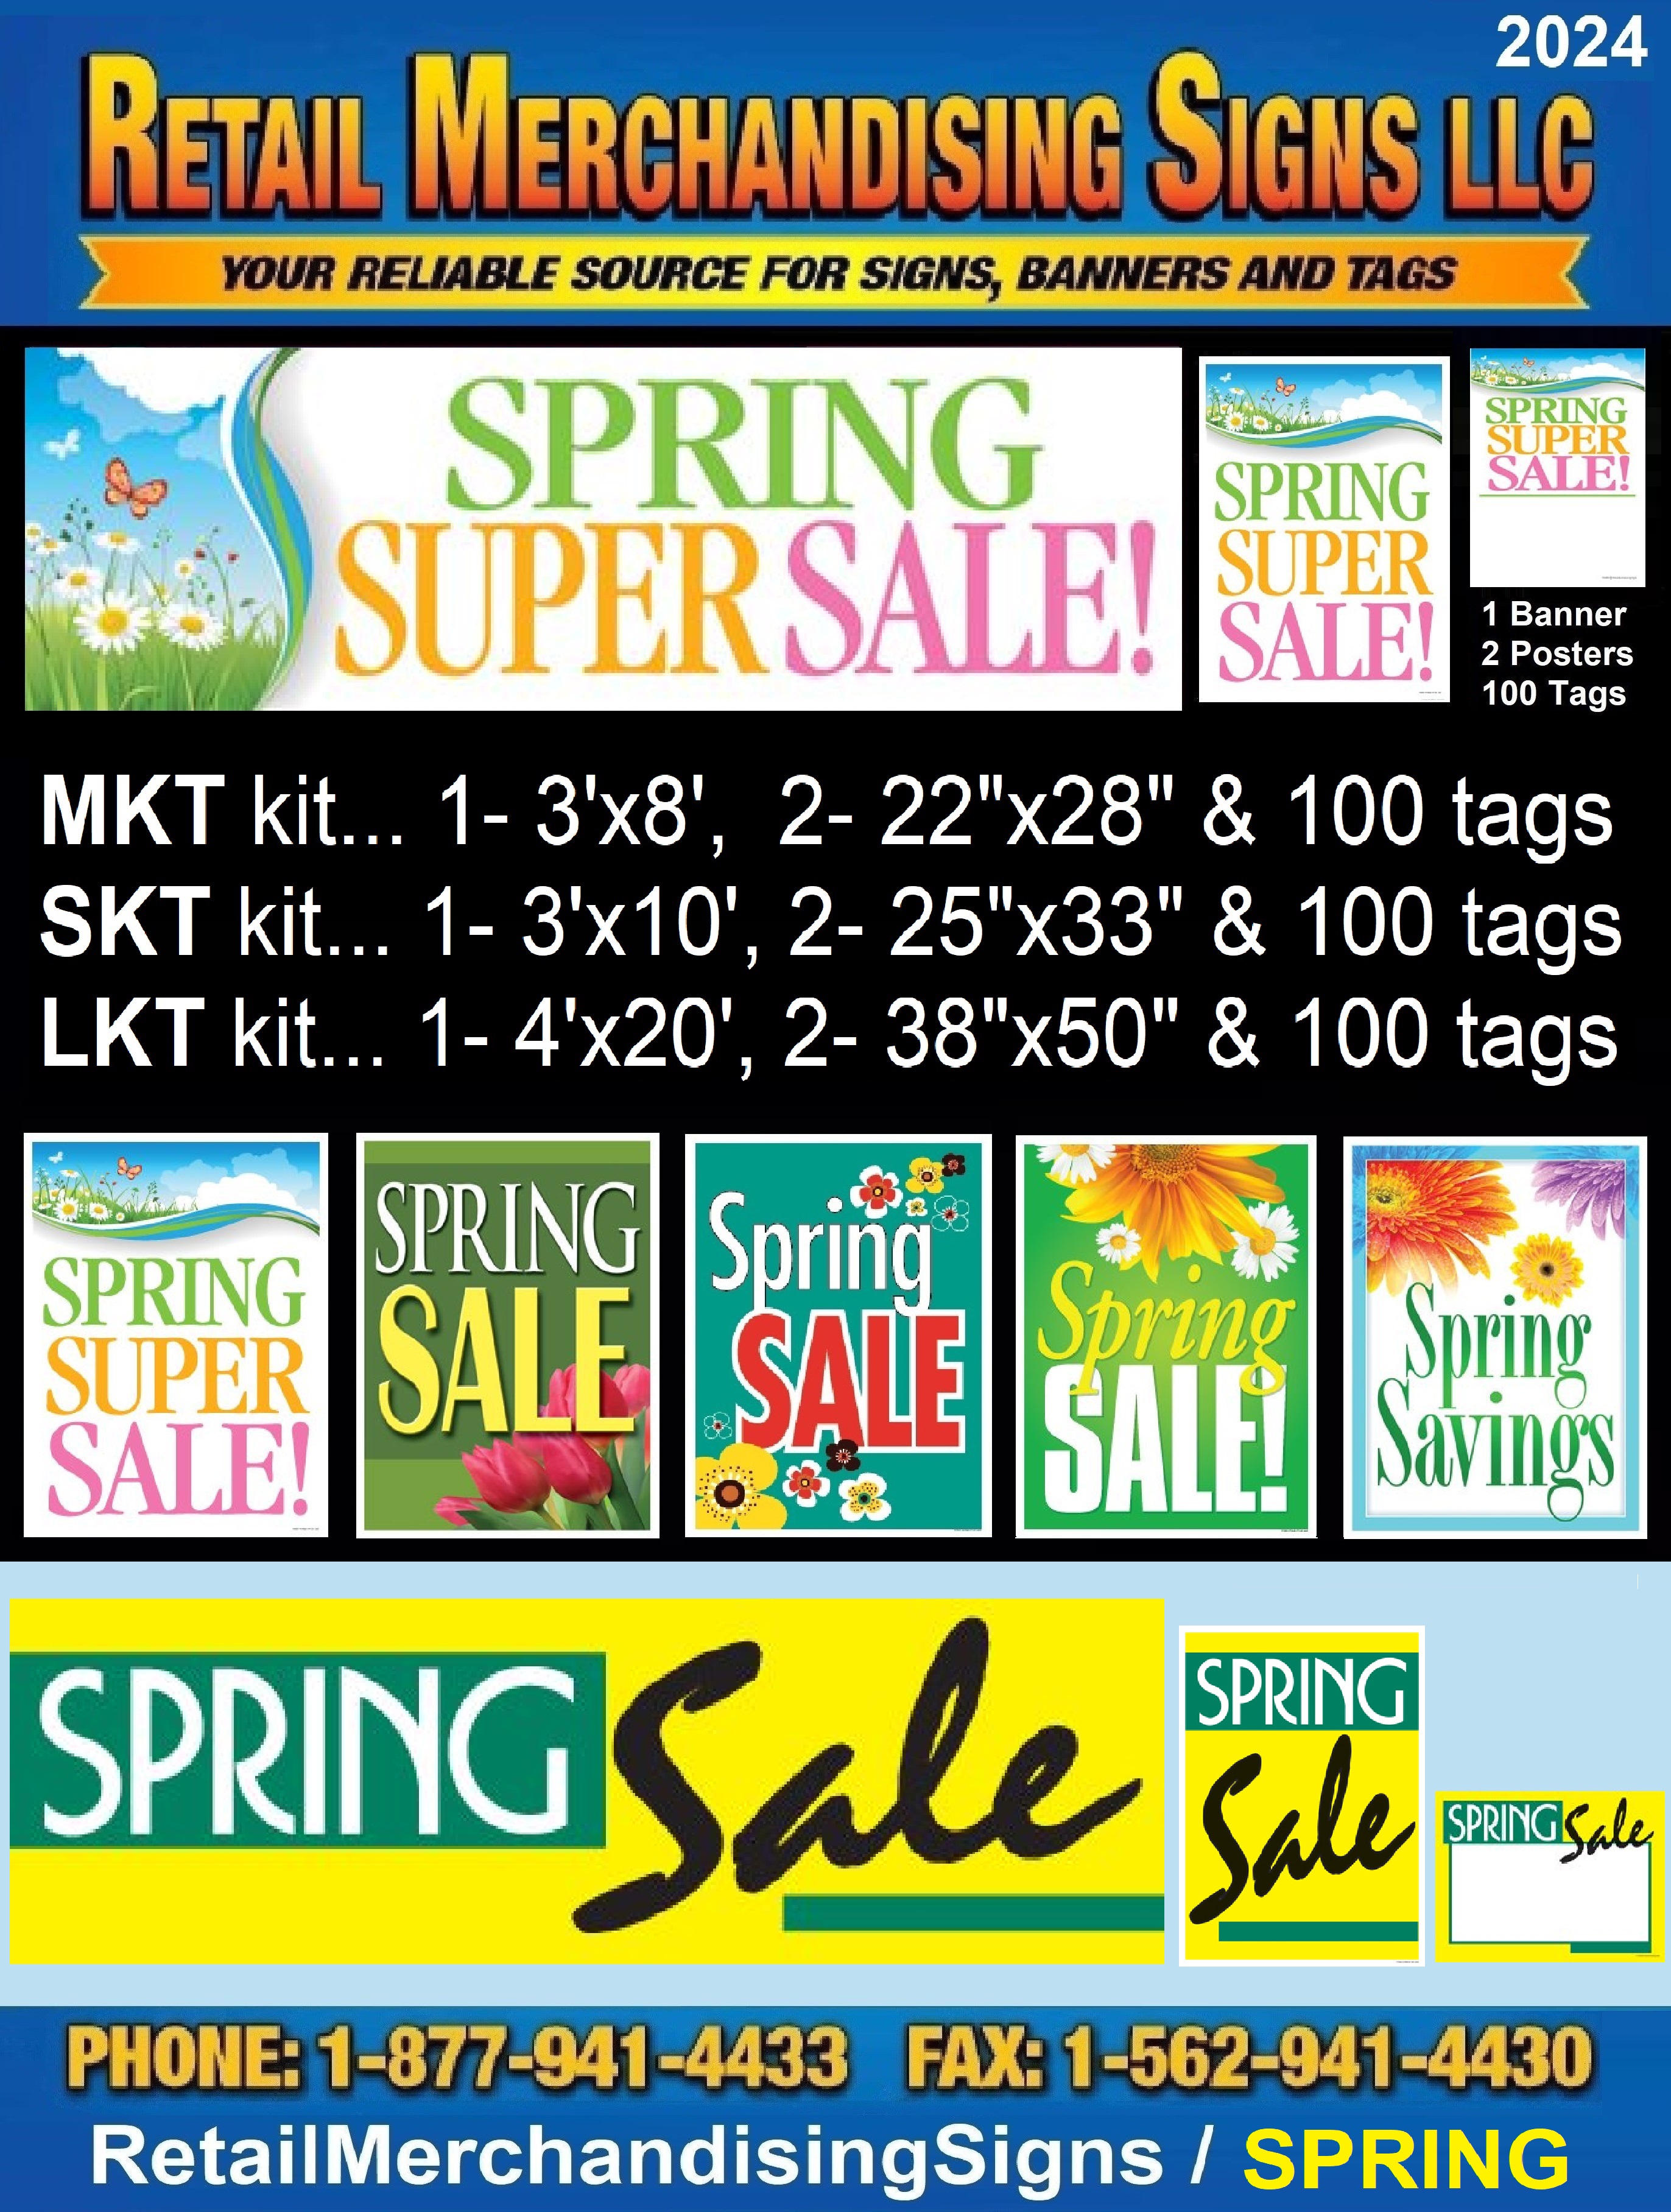 https://www.retailmerchandisingsigns.com/images/Spring_Sale_Savings_Signs_Price_Tags_Cards_Sale_Signs_Banners_Window_Posters_and_kits_from_Retail_Merchandising_Signs.jpg